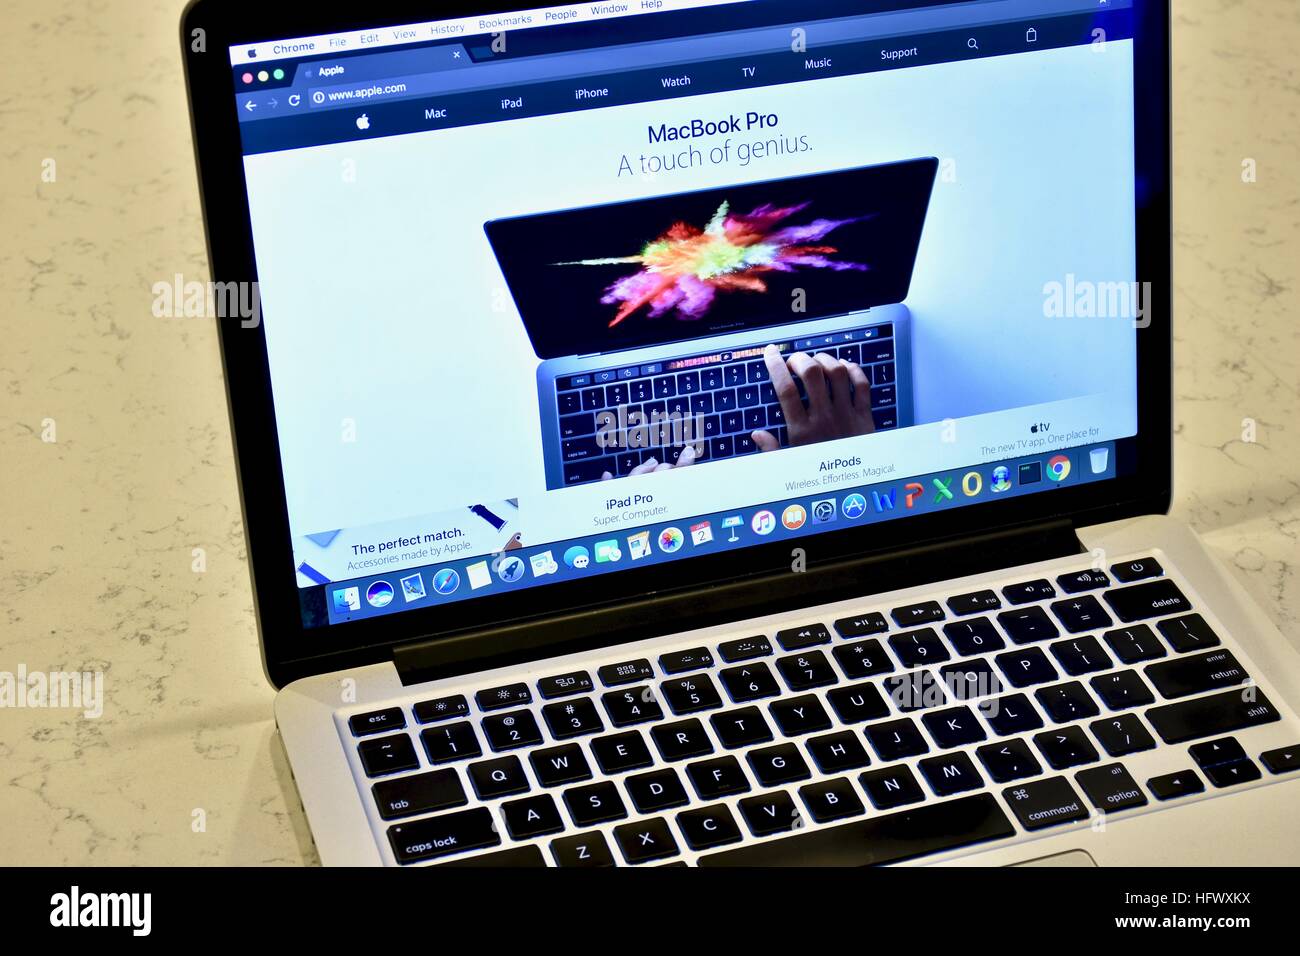 download chrome on a mac laptop for free